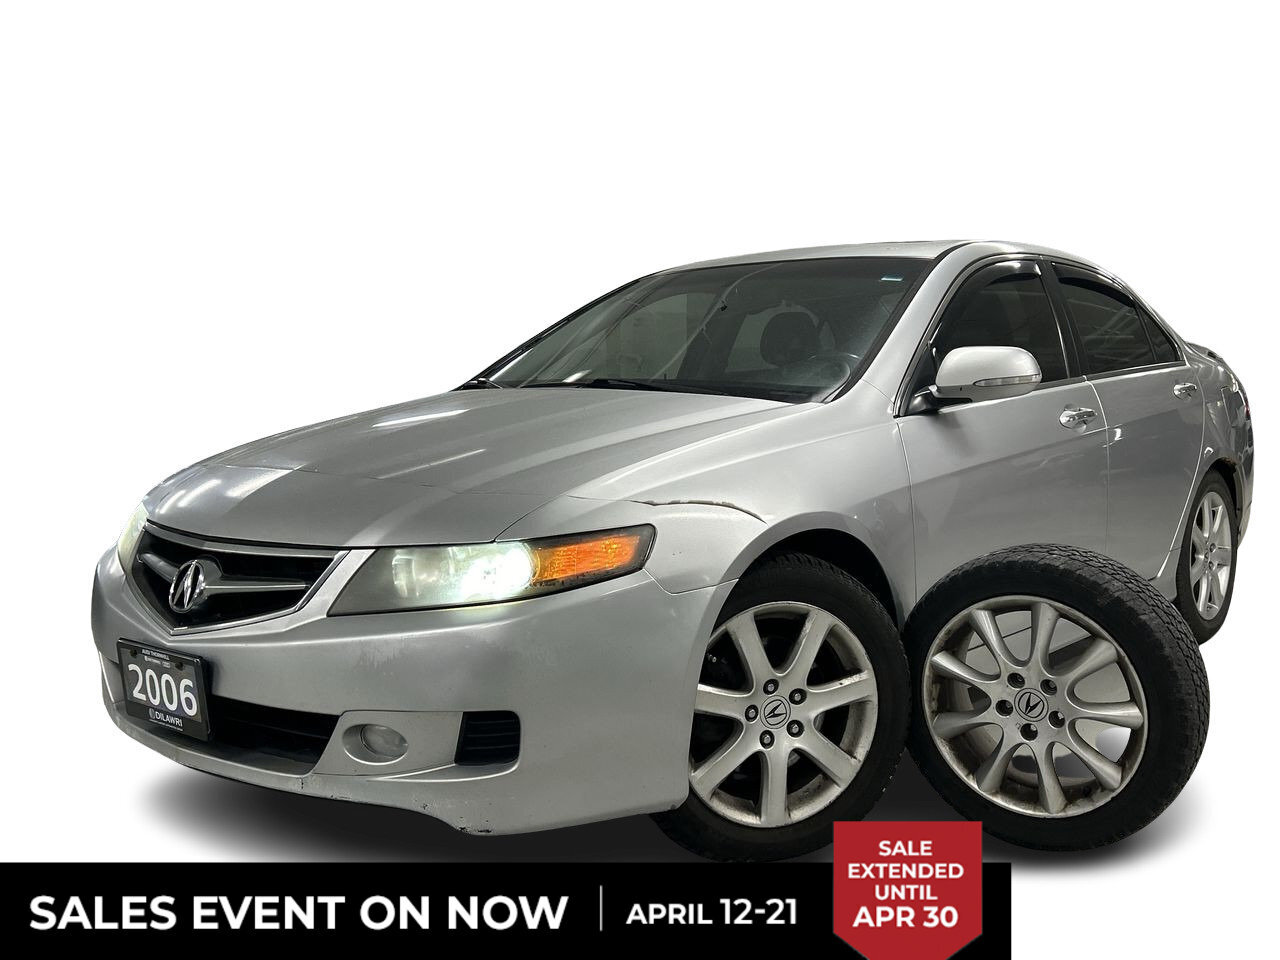 2006 Acura TSX 5 SPD at AS - IS | WINTER TIRES / 